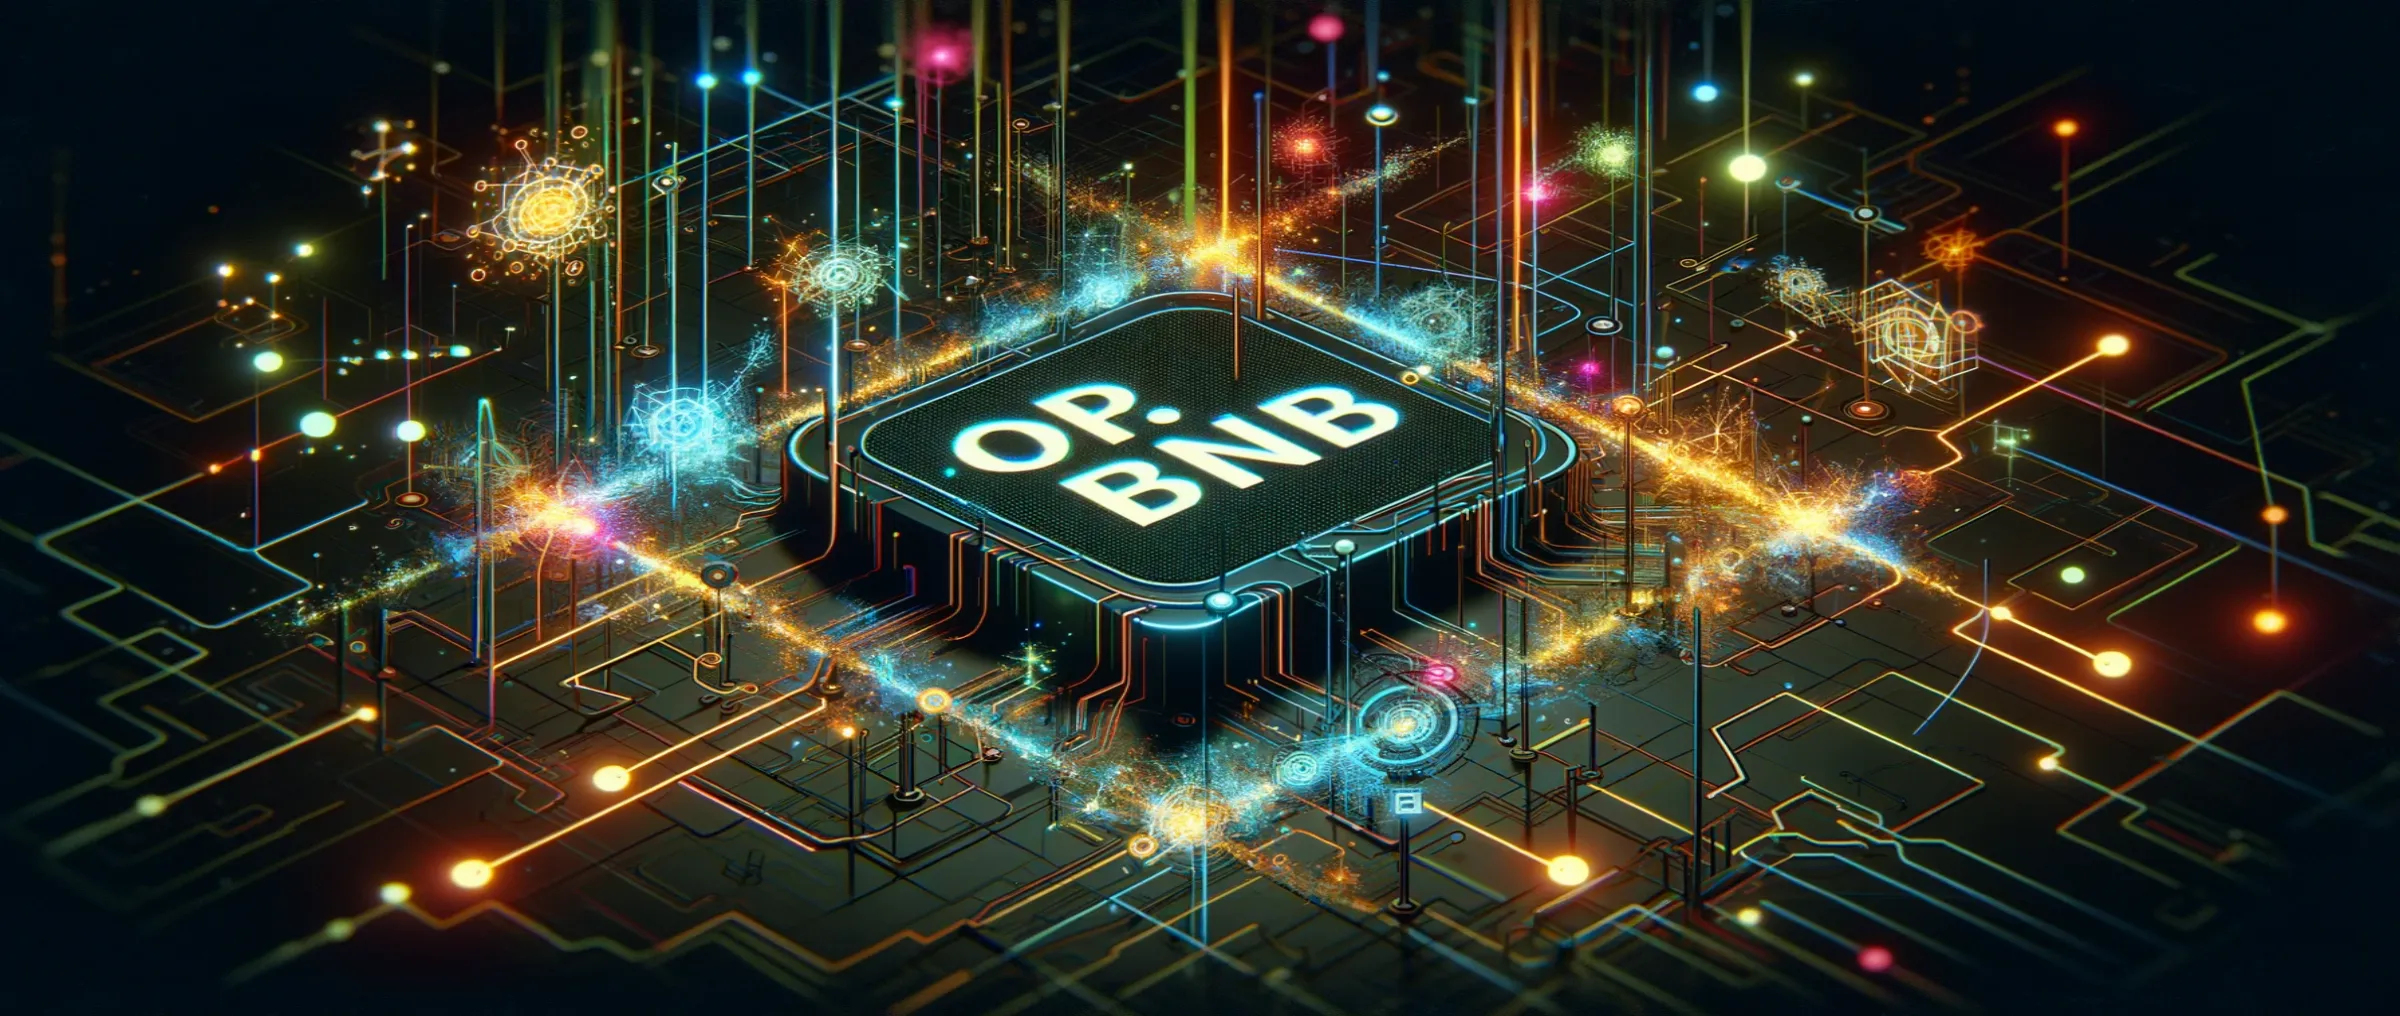 The opBNB network is facing a technical glitch